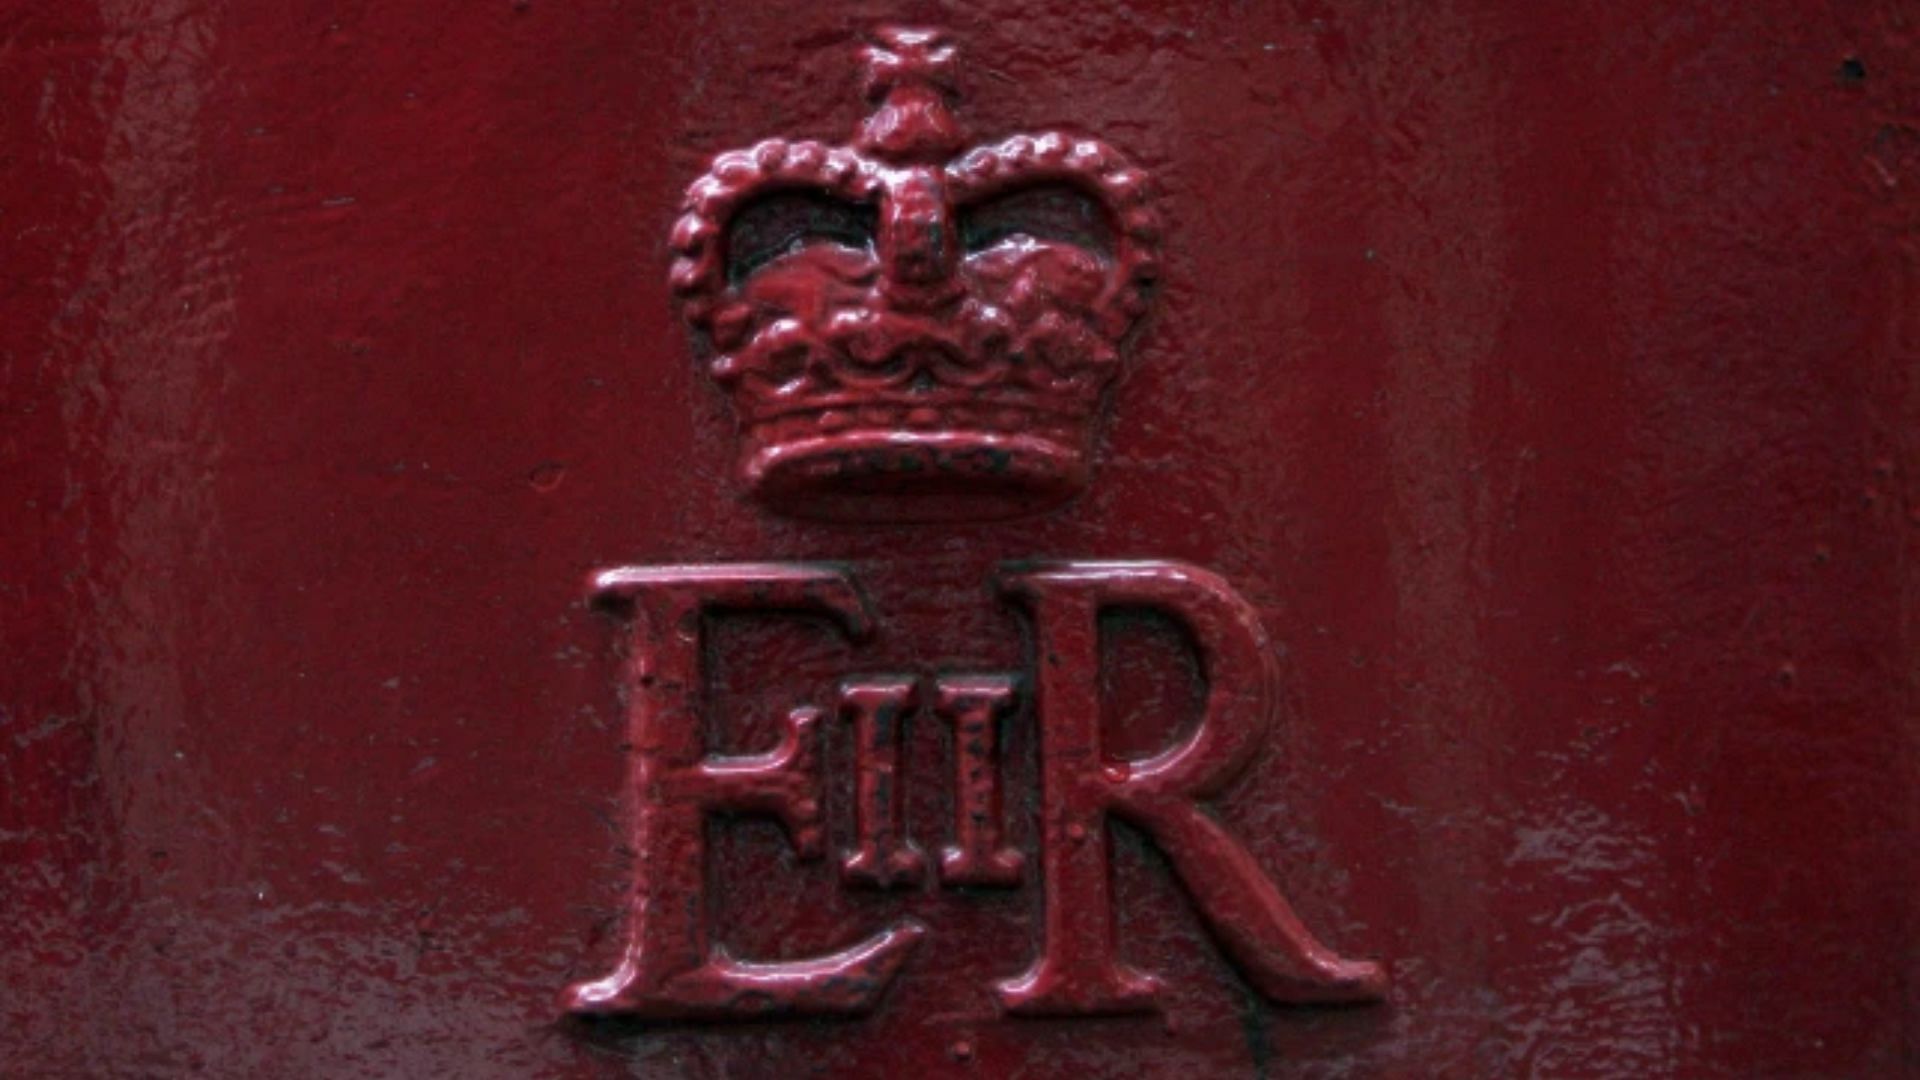 &quot;EIIR&quot; has a huge significance in royal history. (Image via BETTMANN/Getty Images)